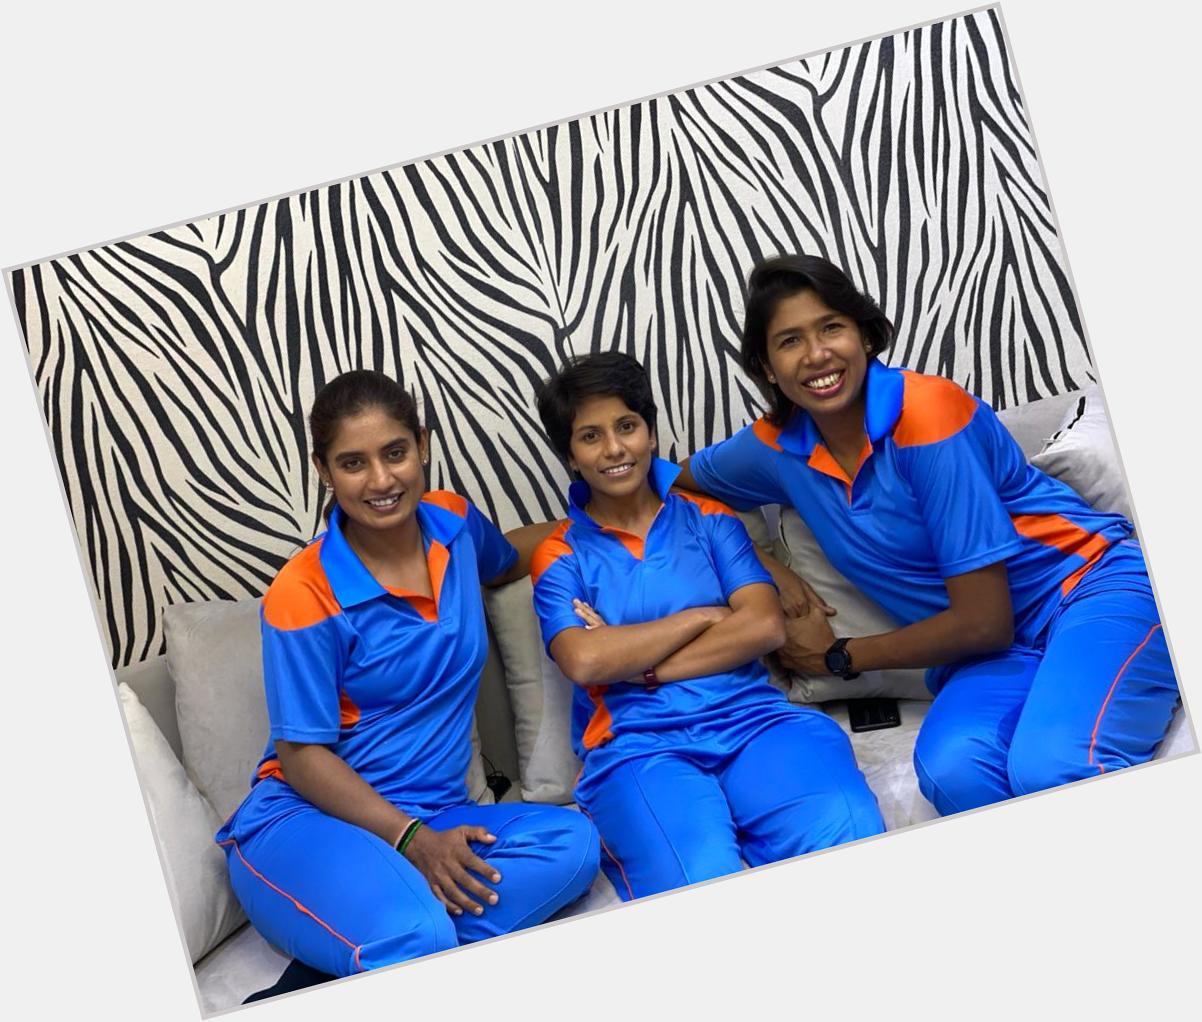 Wishing Jhulan Goswami Ji the legend of the Indian women\s cricket team a very happy birthday.. 